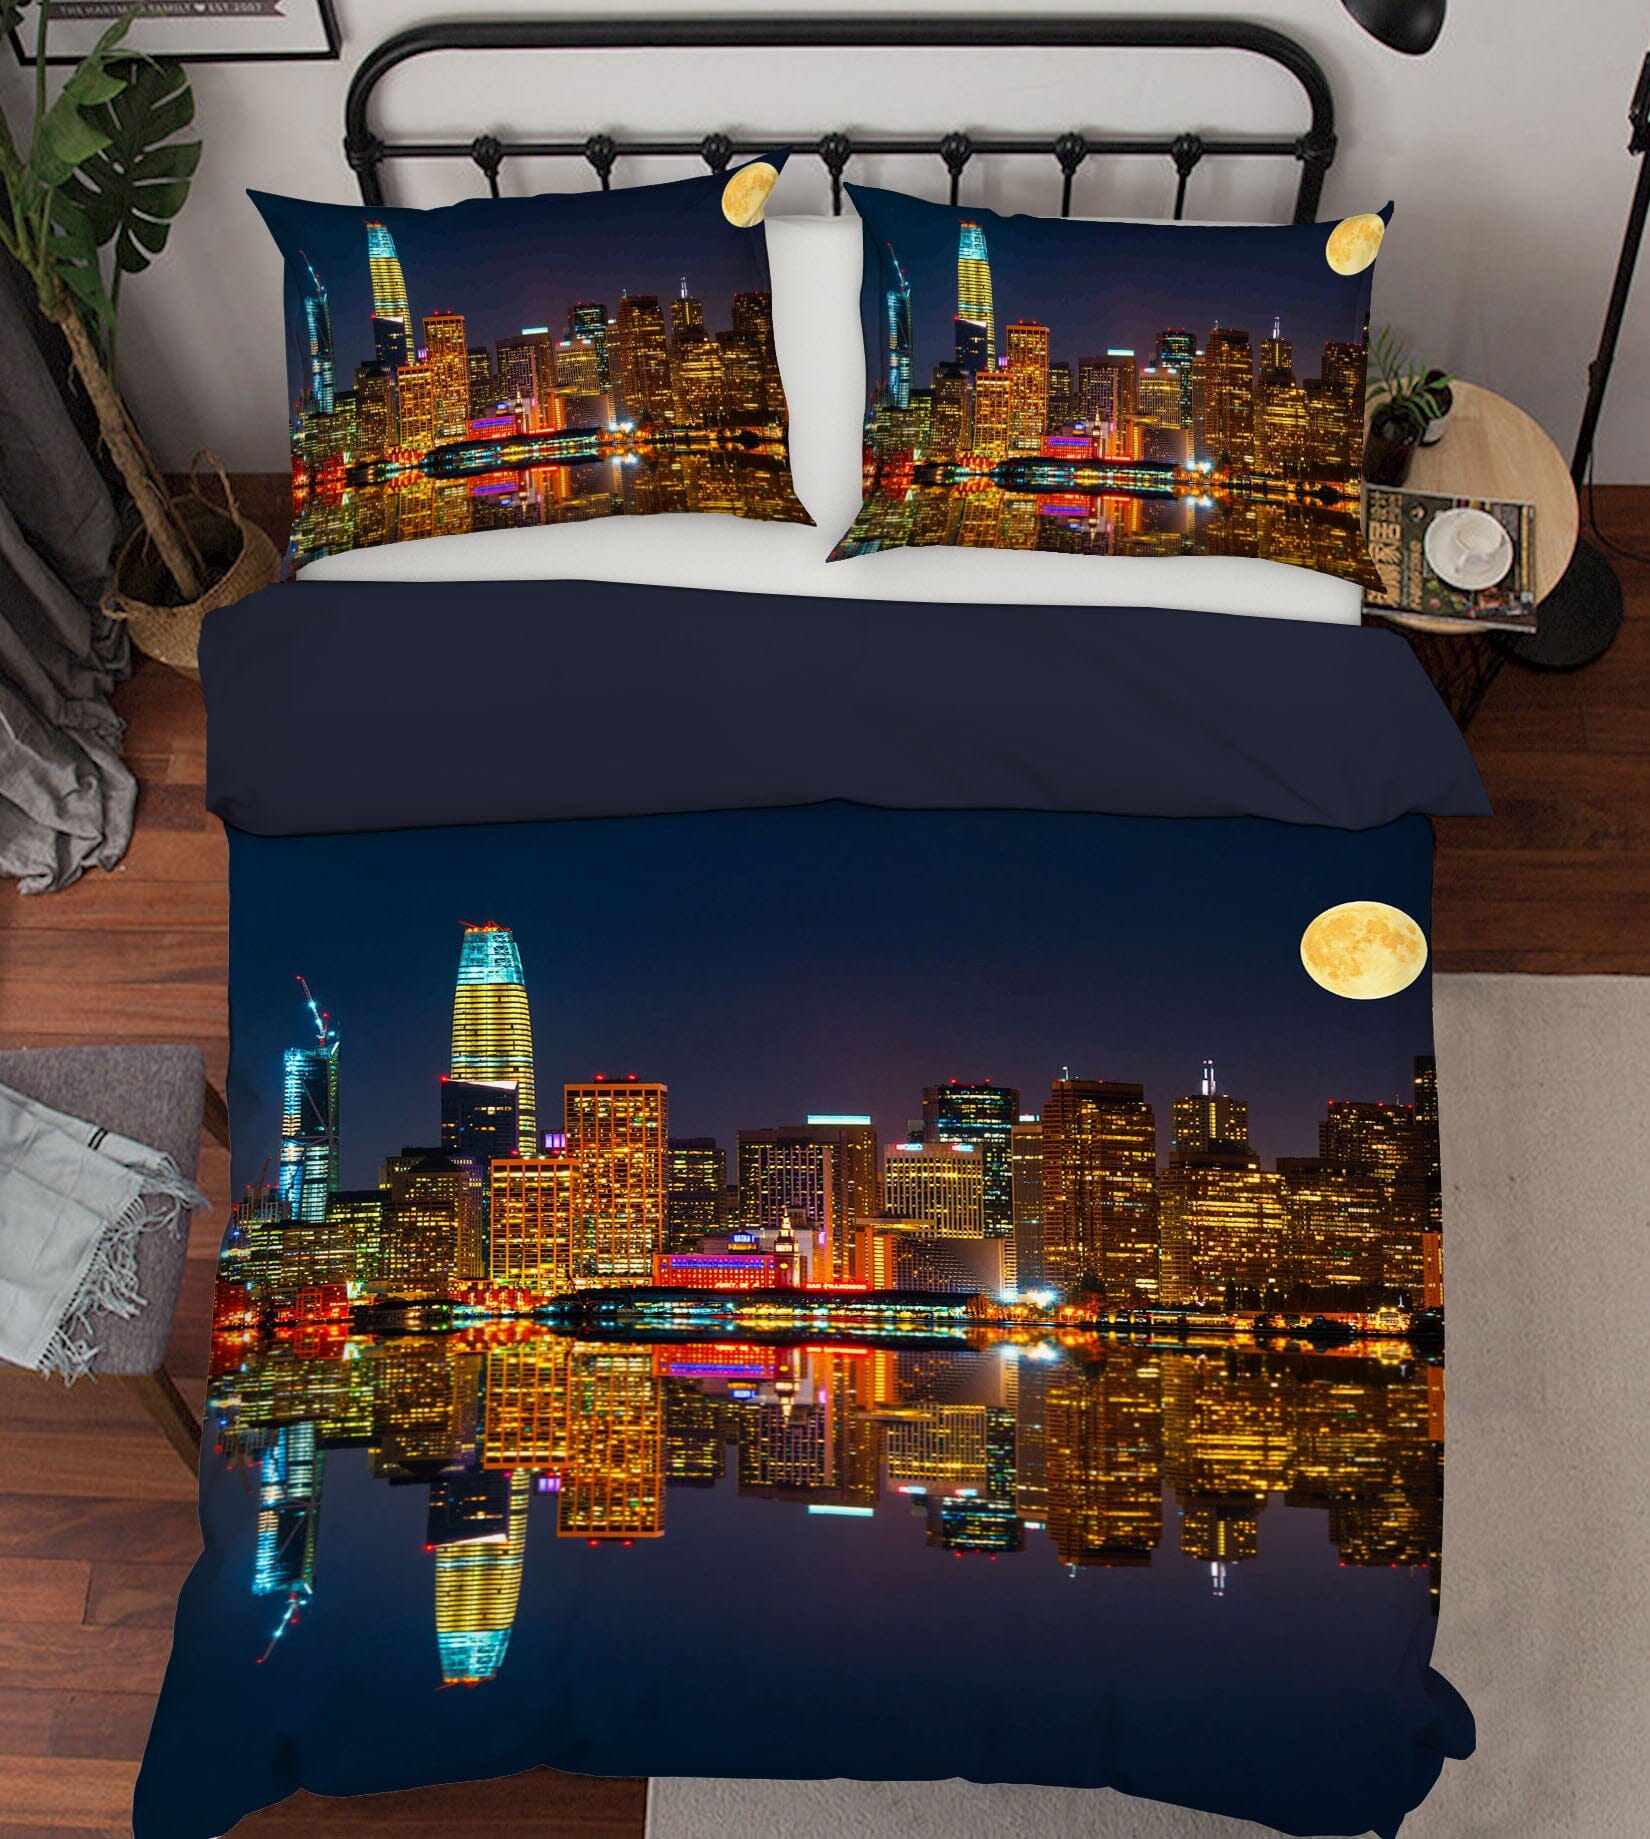 3D Seaside City 2116 Marco Carmassi Bedding Bed Pillowcases Quilt Quiet Covers AJ Creativity Home 